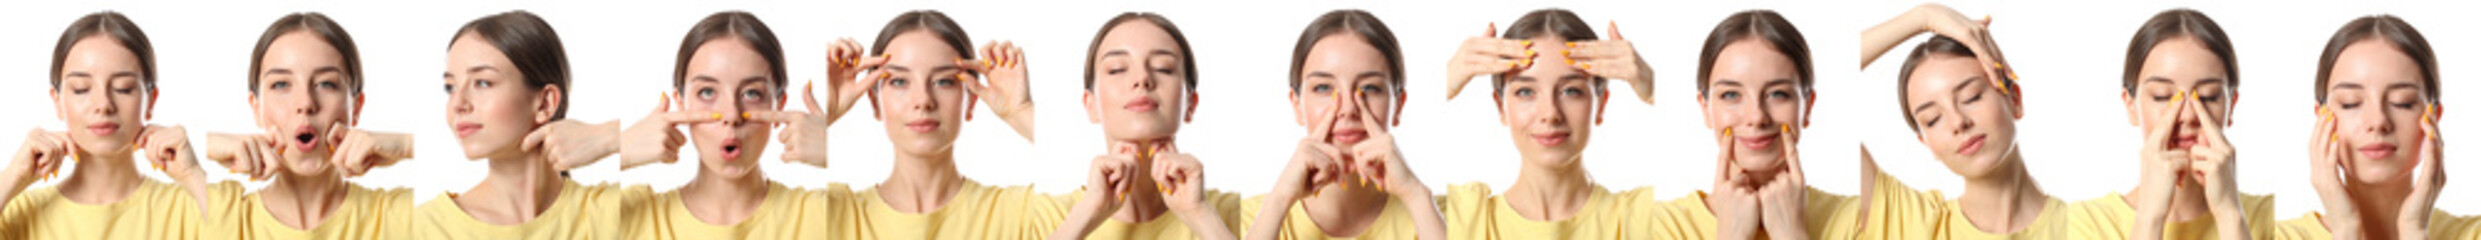 Young woman doing face building exercises against white background